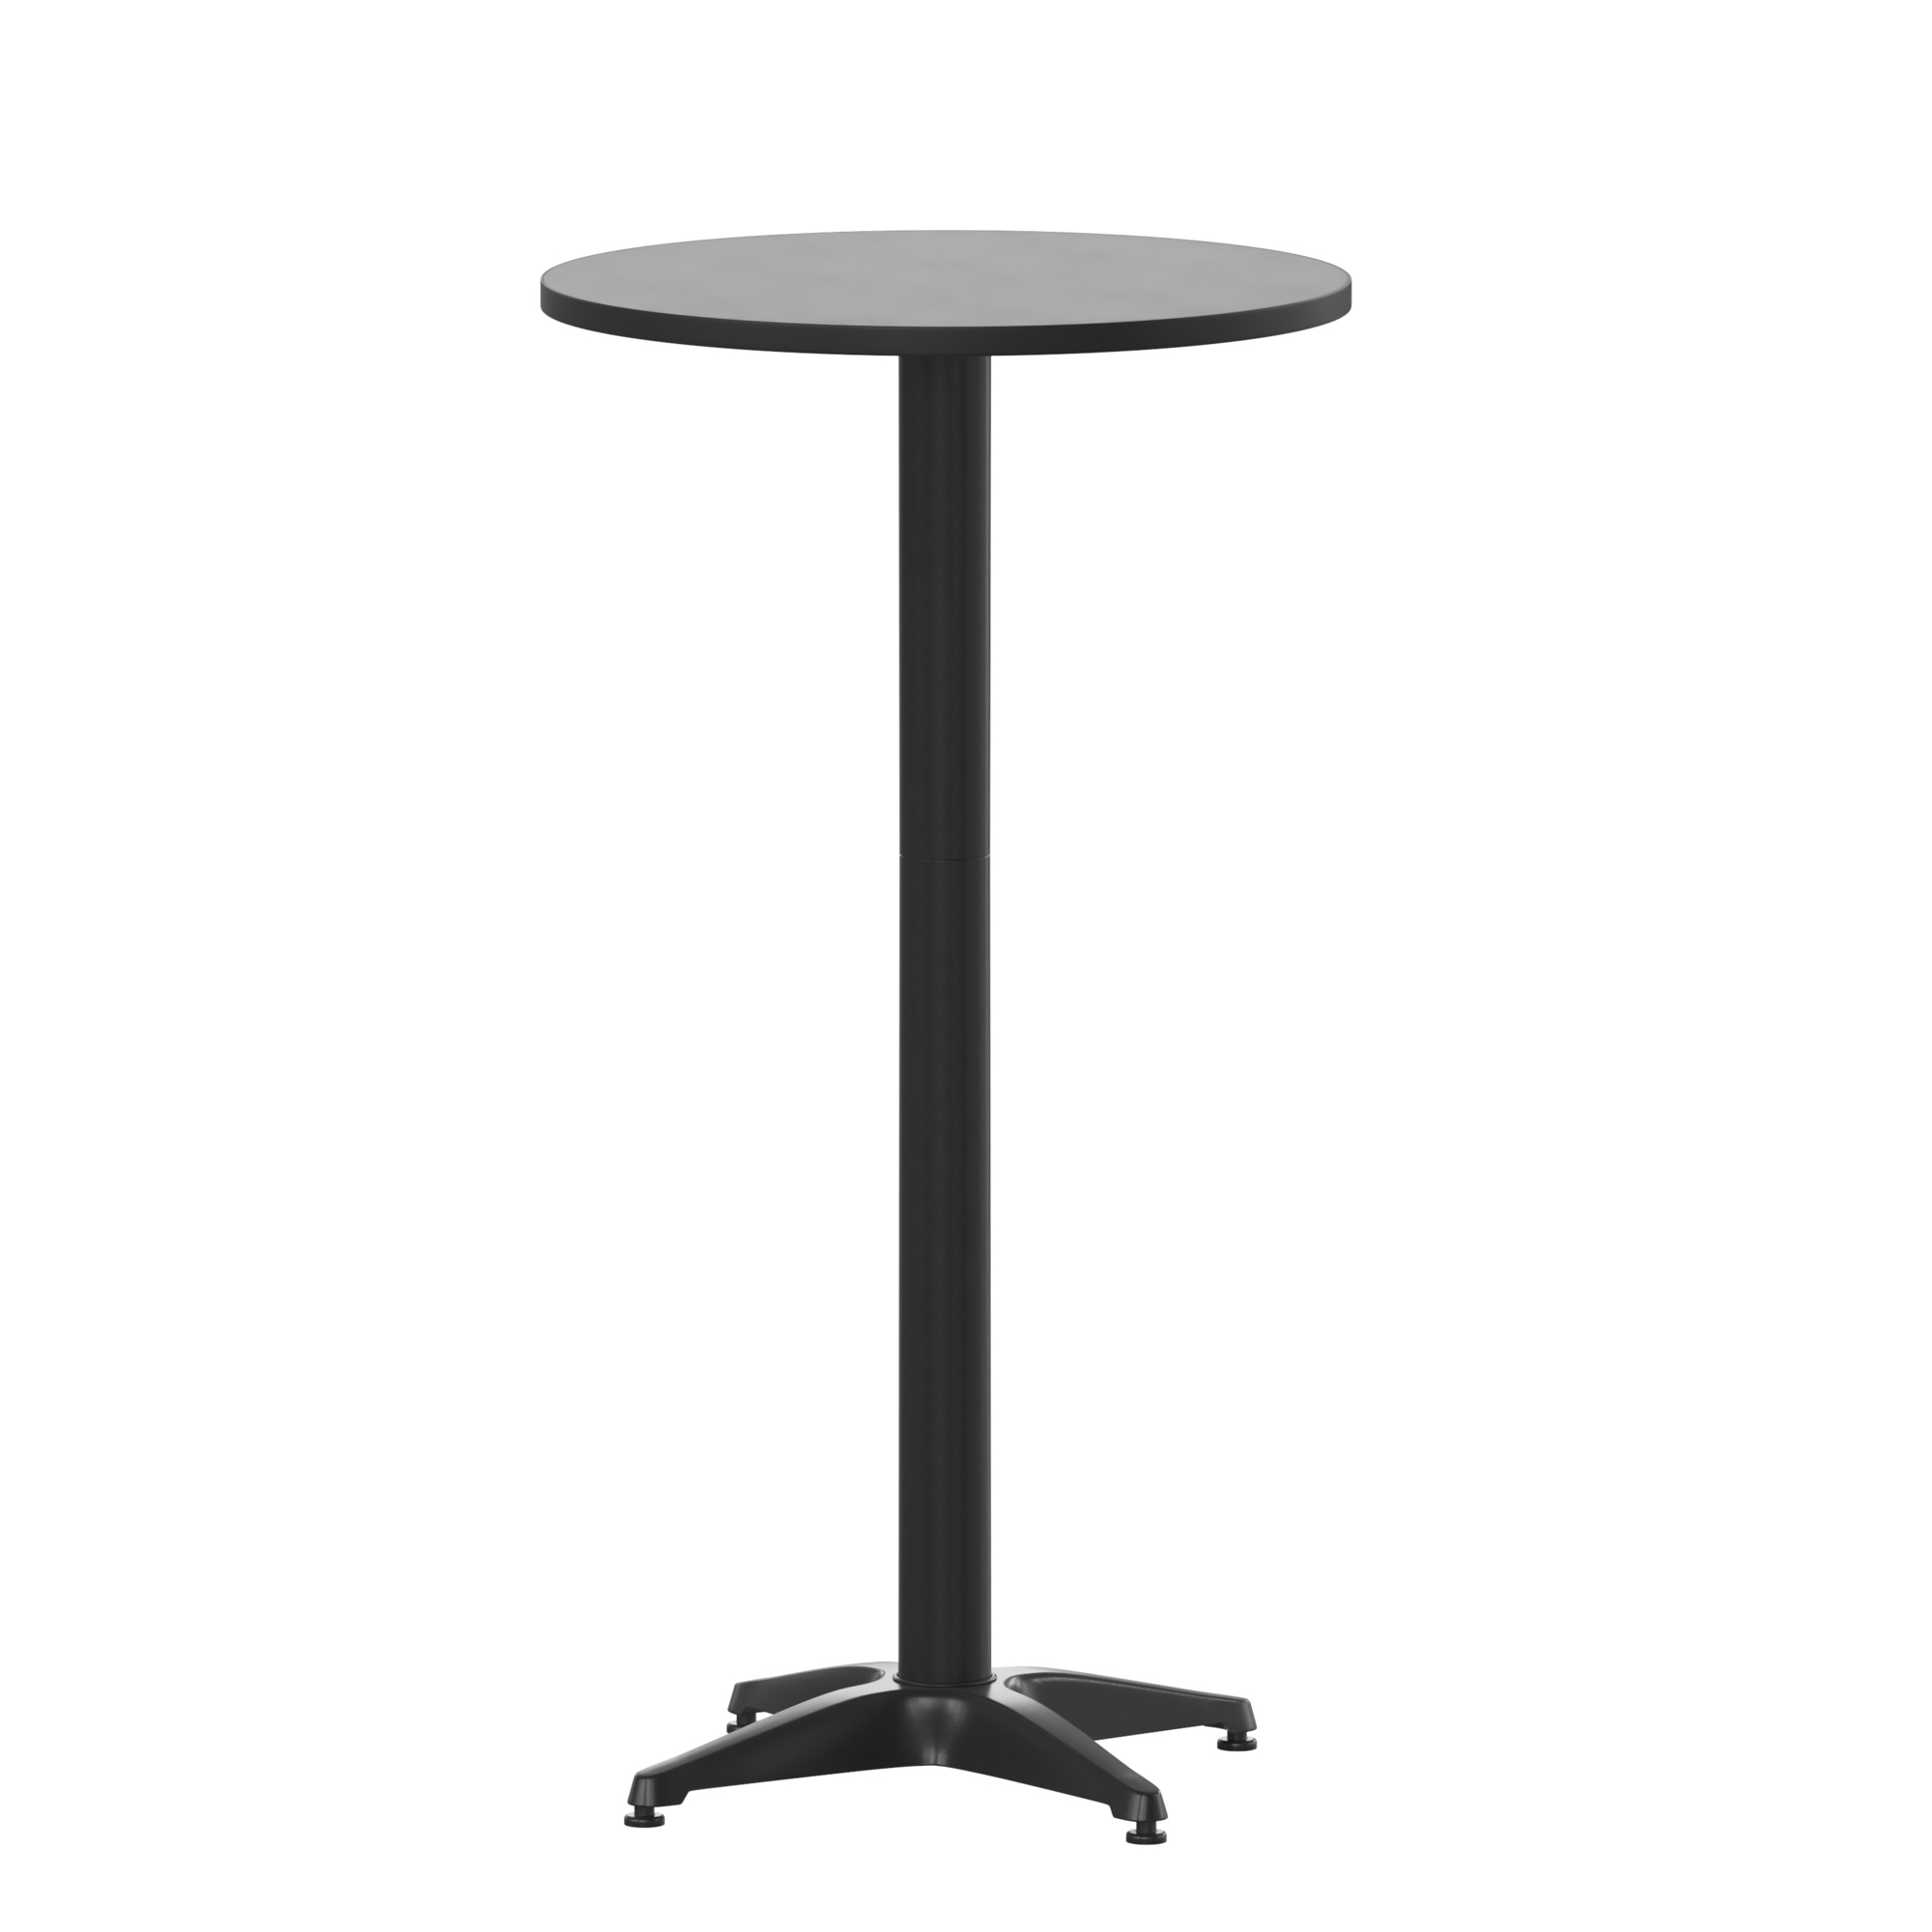 Flash Furniture, 23.25RD Black Aluminum Bar Table - Flip-Up Table, Table Shape Round, Primary Color Black, Height 45 in, Model TLH059ABK